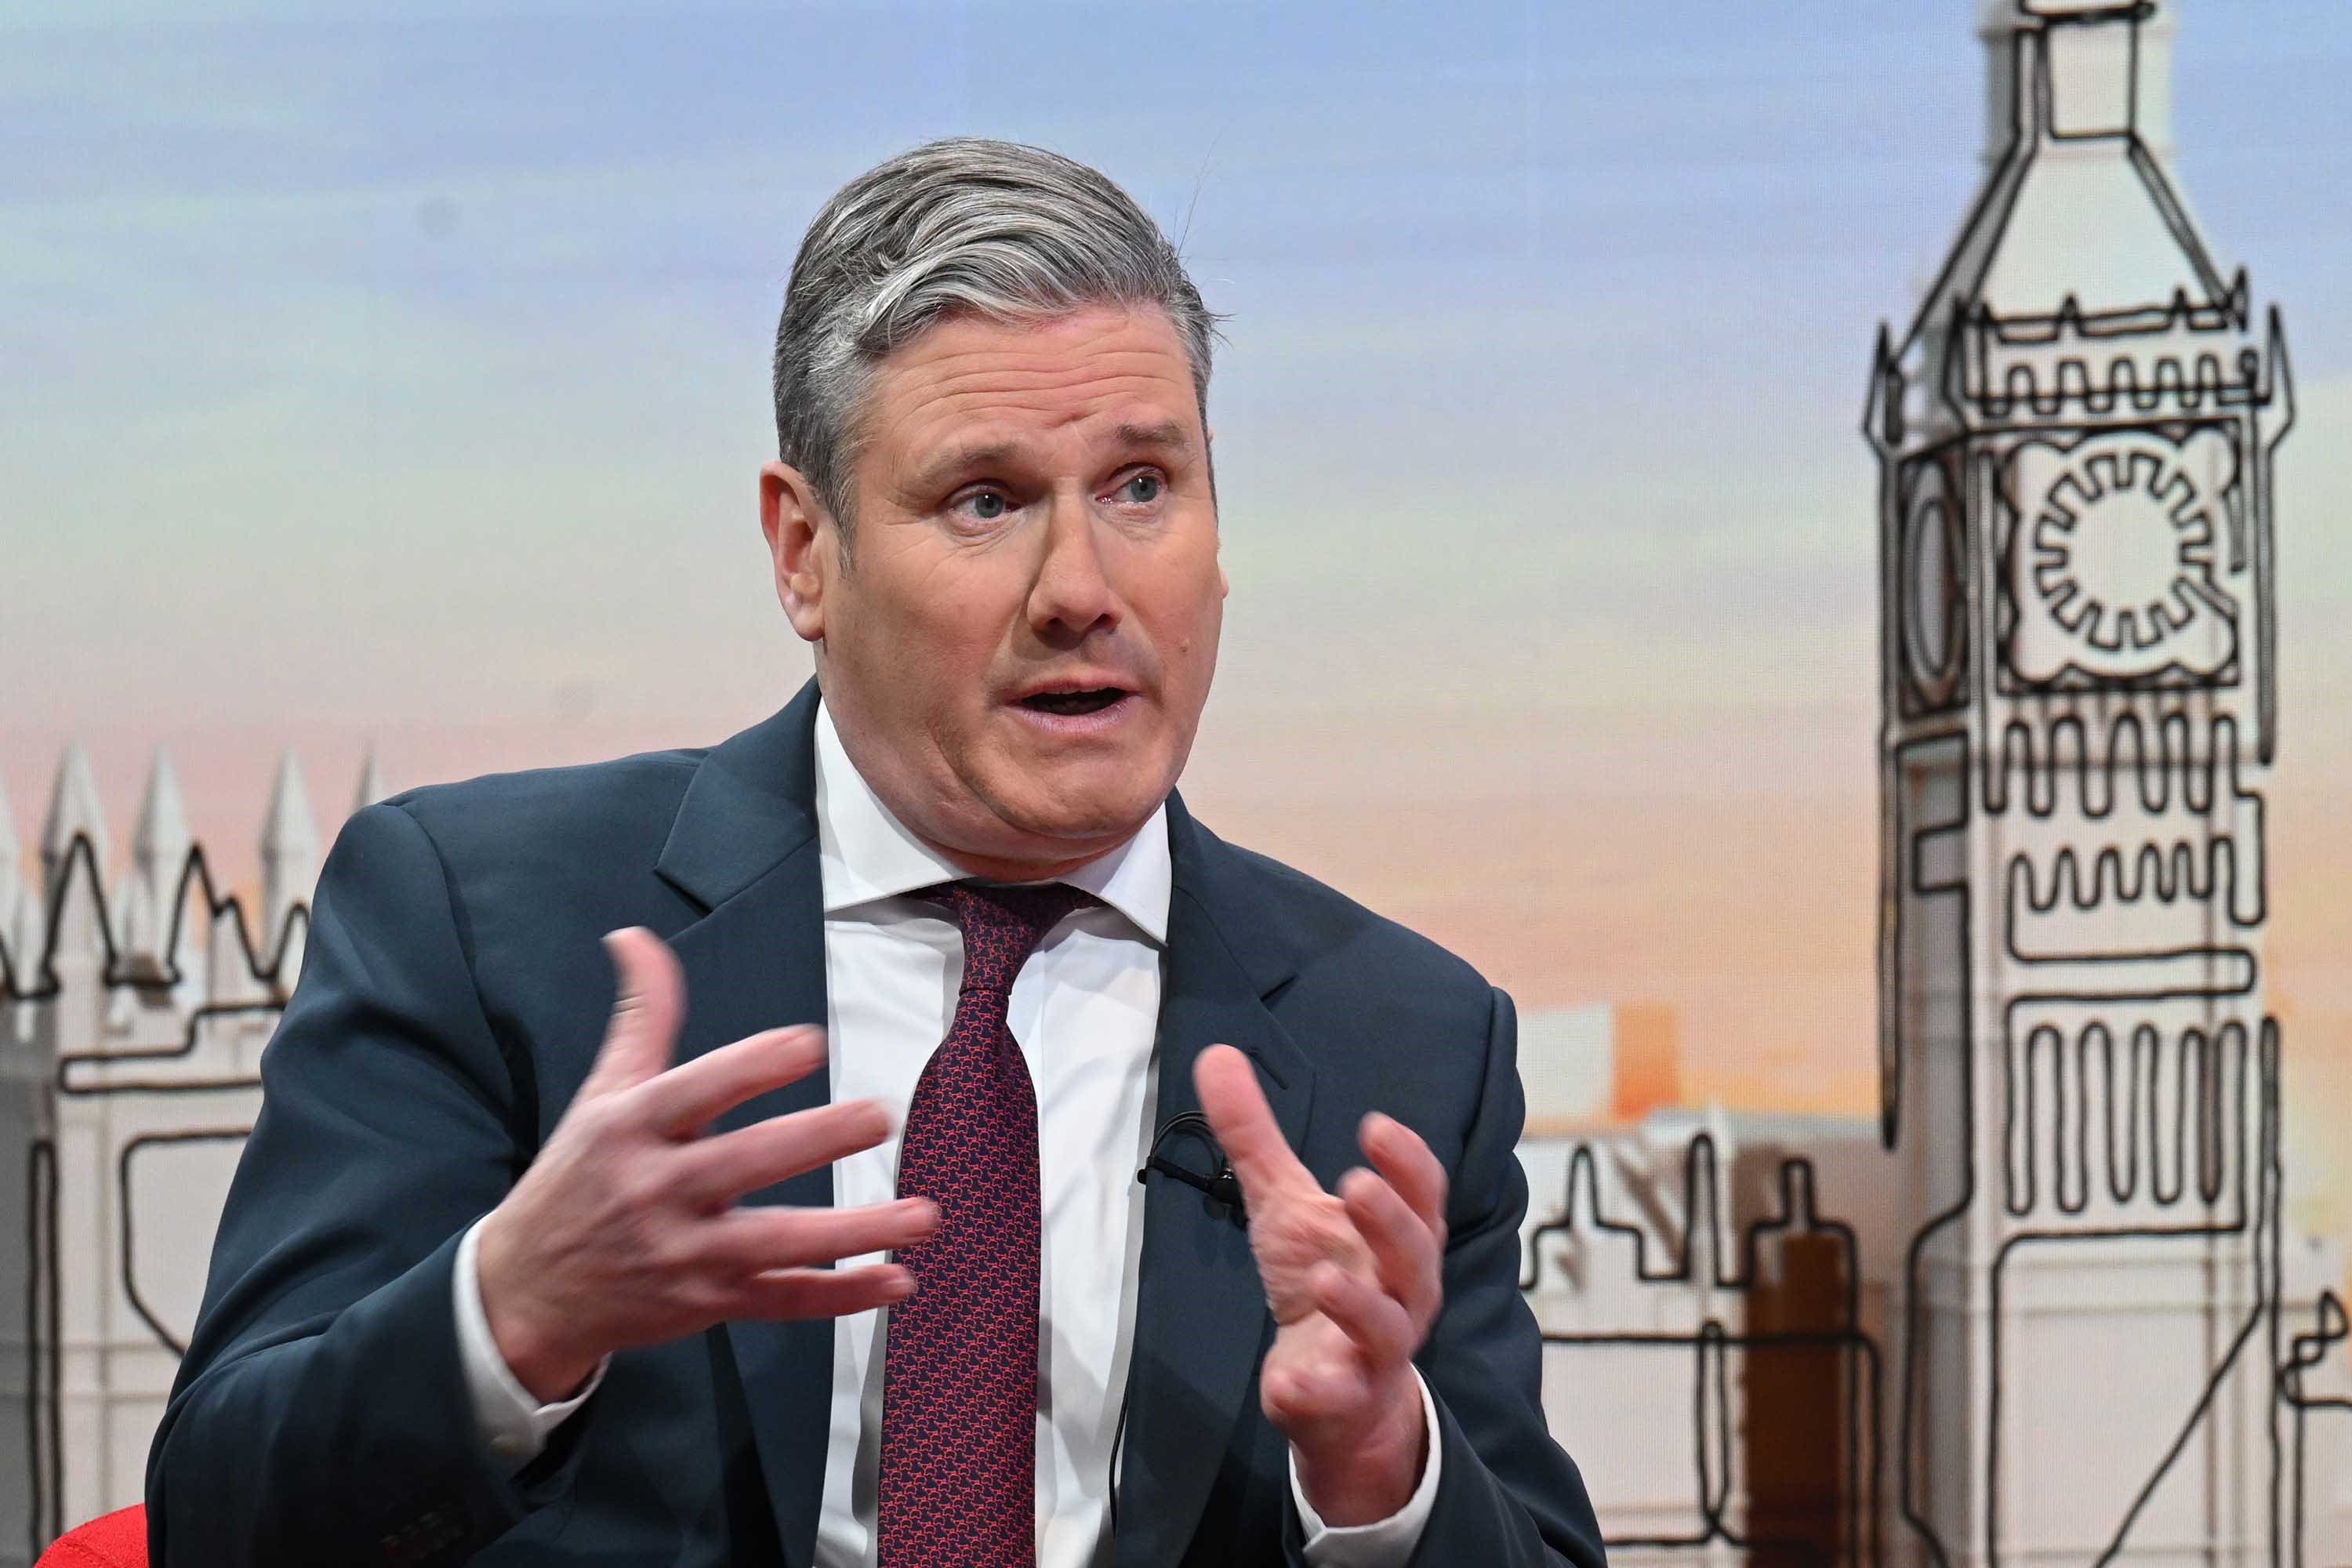 Sir Keir Starmer spoke about his NHS reform proposals during a BBC interview (Jeff Overs/BBC/PA)